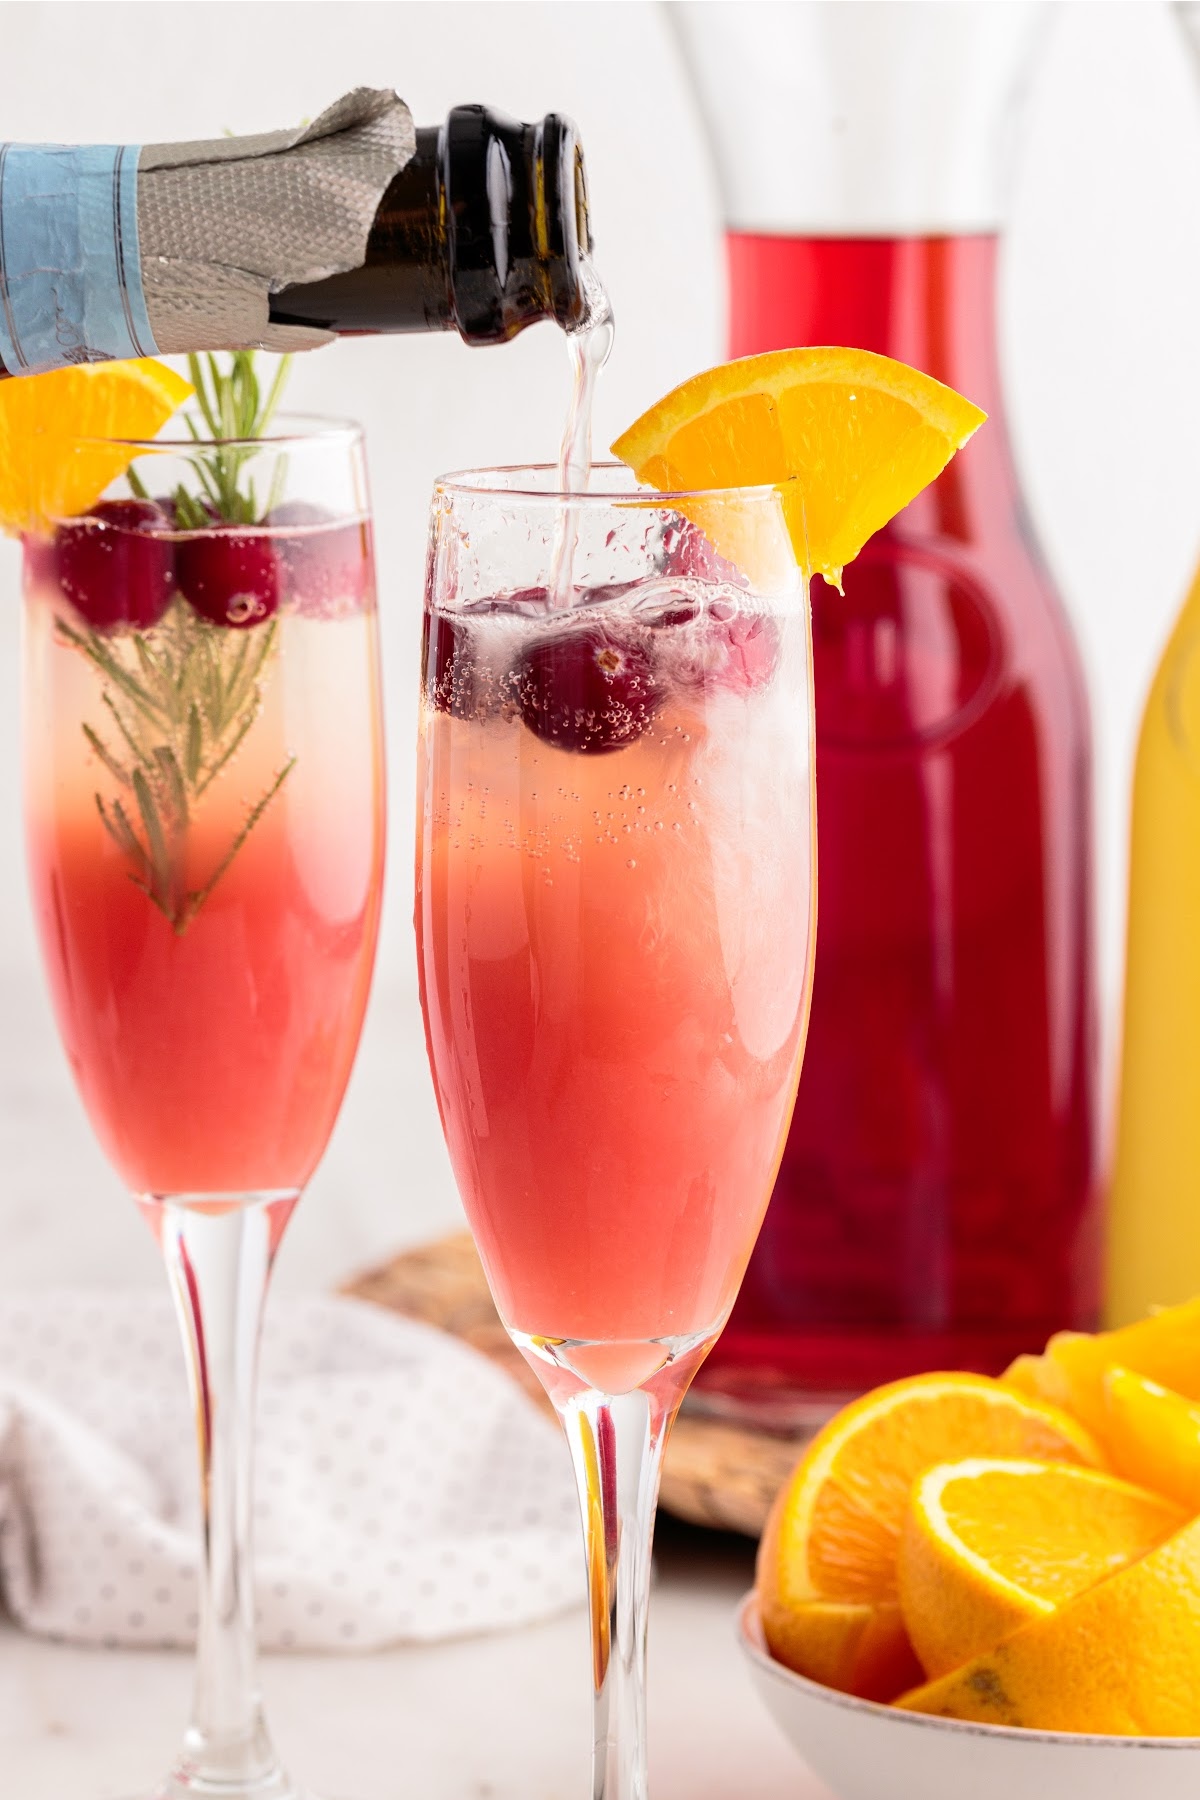 Prosecco added to the Cranberry Orange Mimosa.